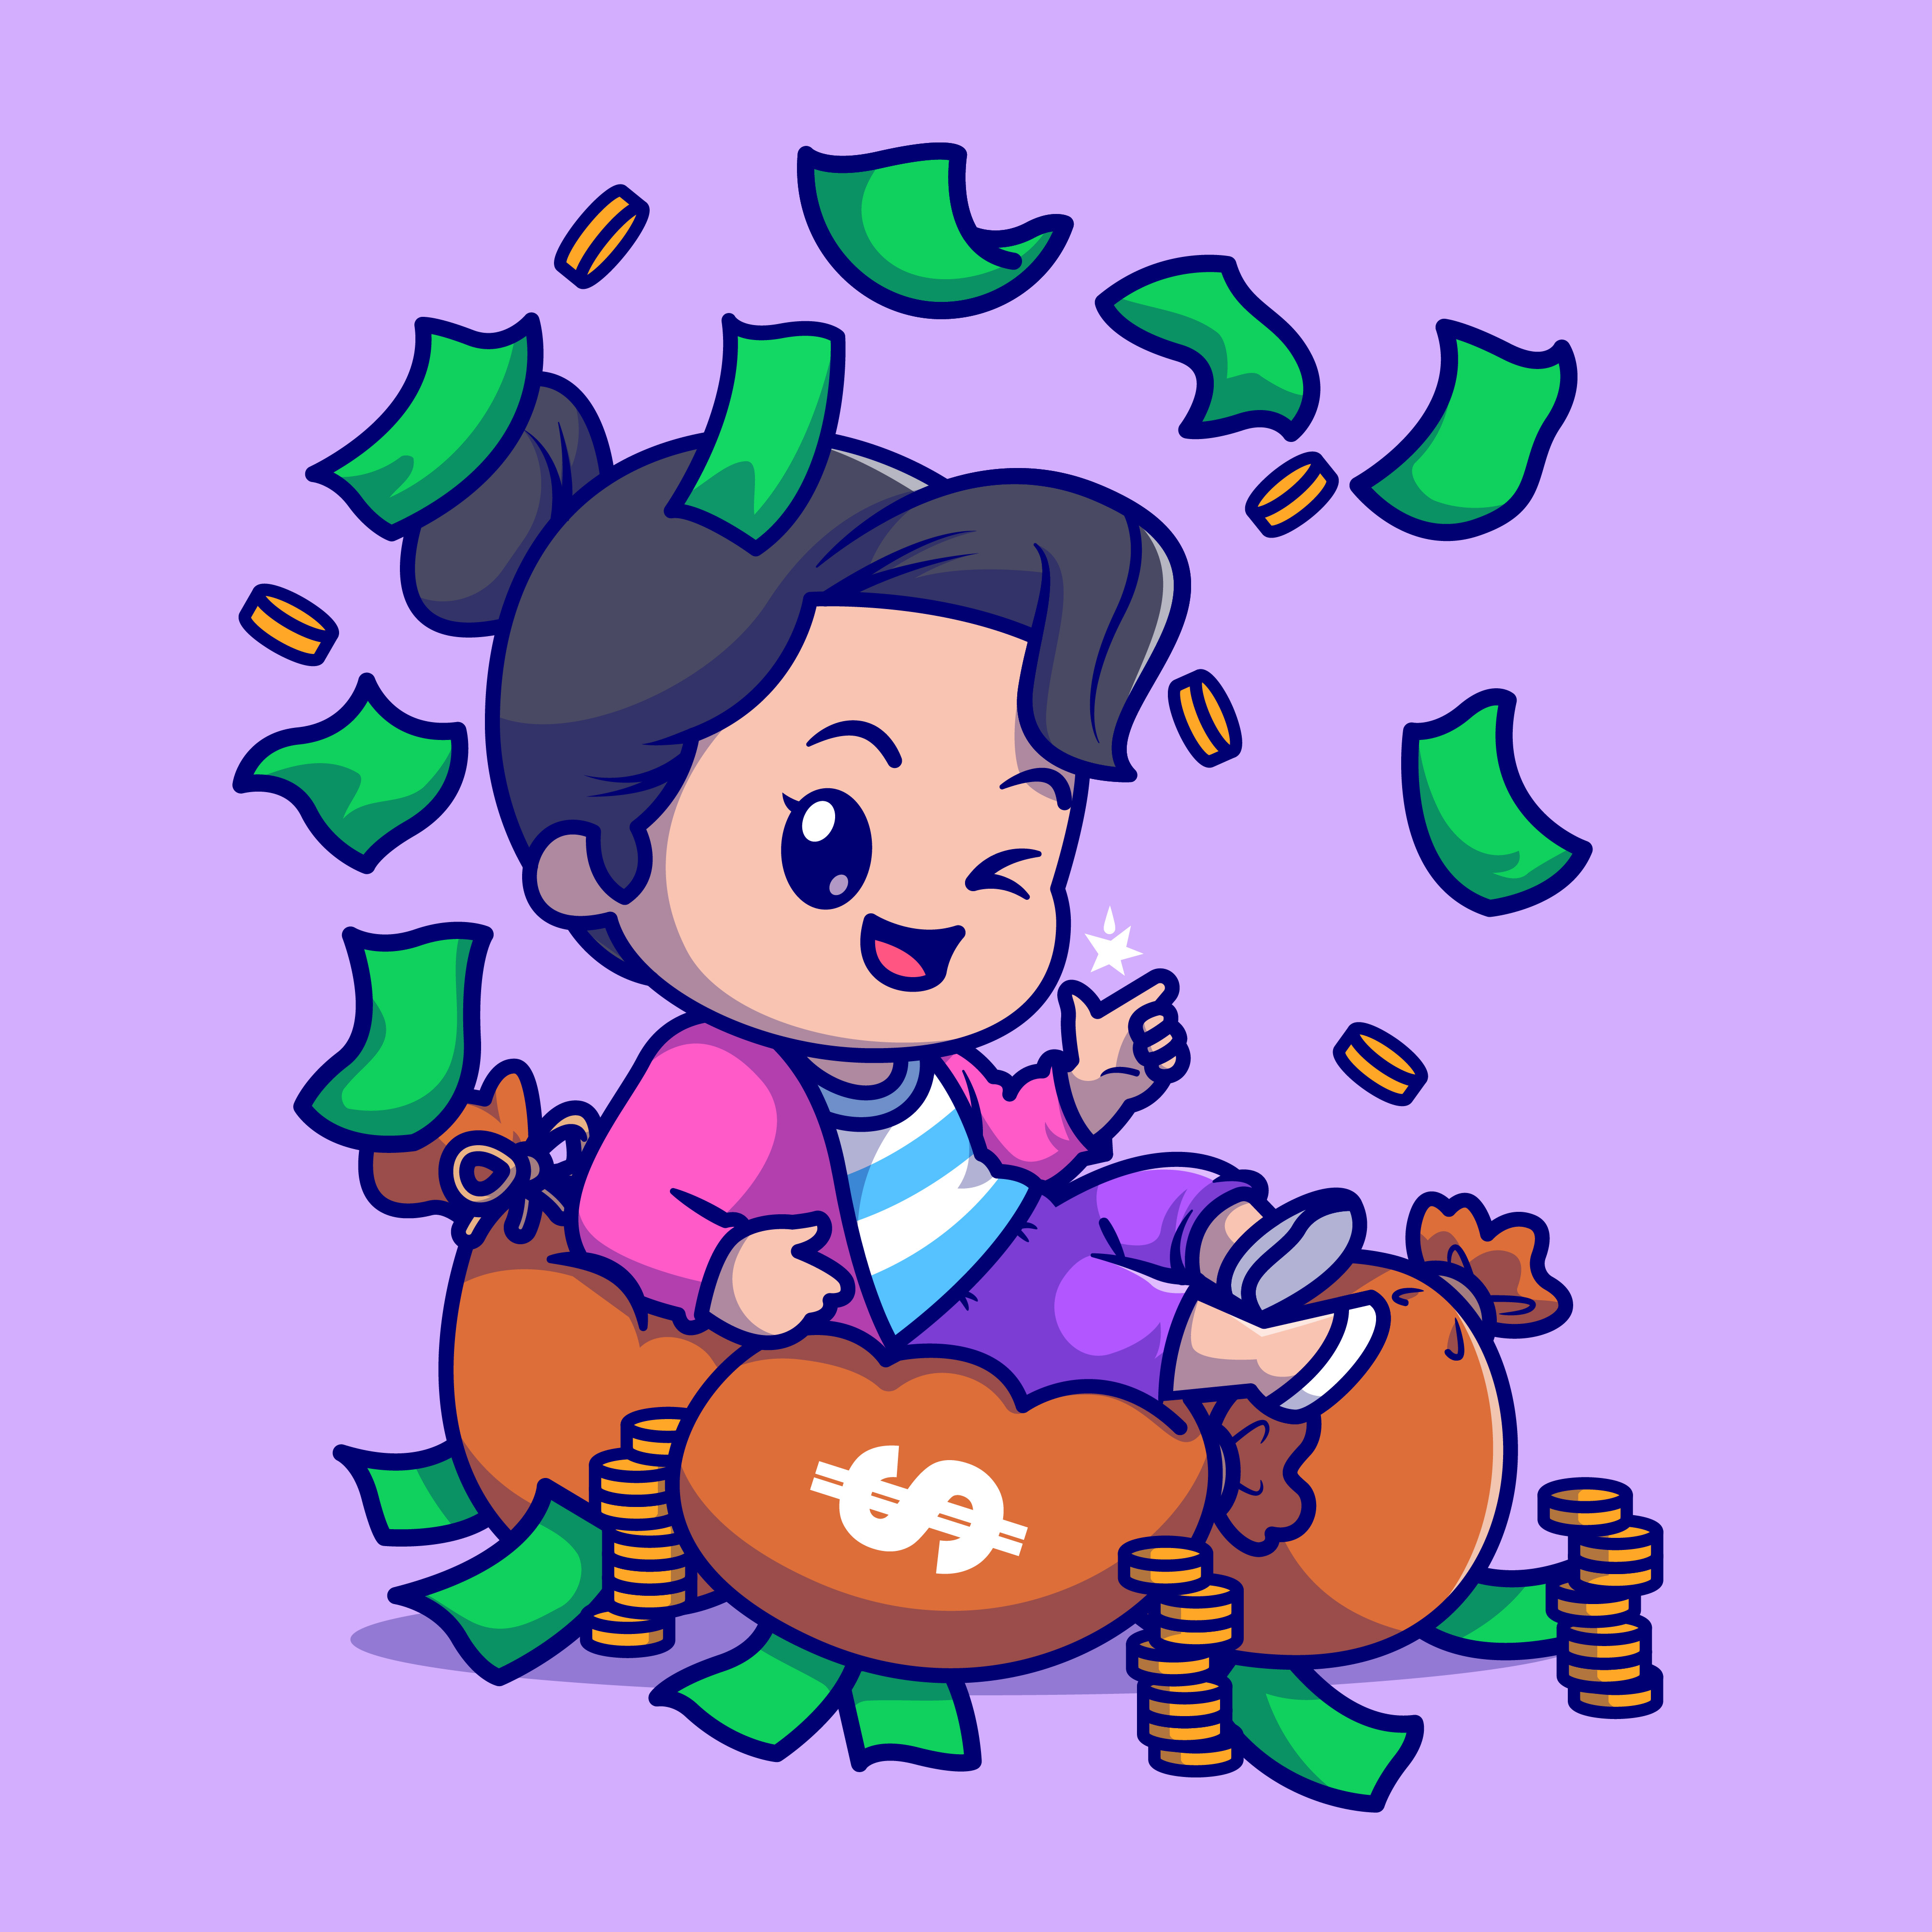 Cute Rich Girl With Money Cartoon Vector Icon Illustration. People Finance Icon Concept Isolated Premium Vector. Flat Cartoon Style